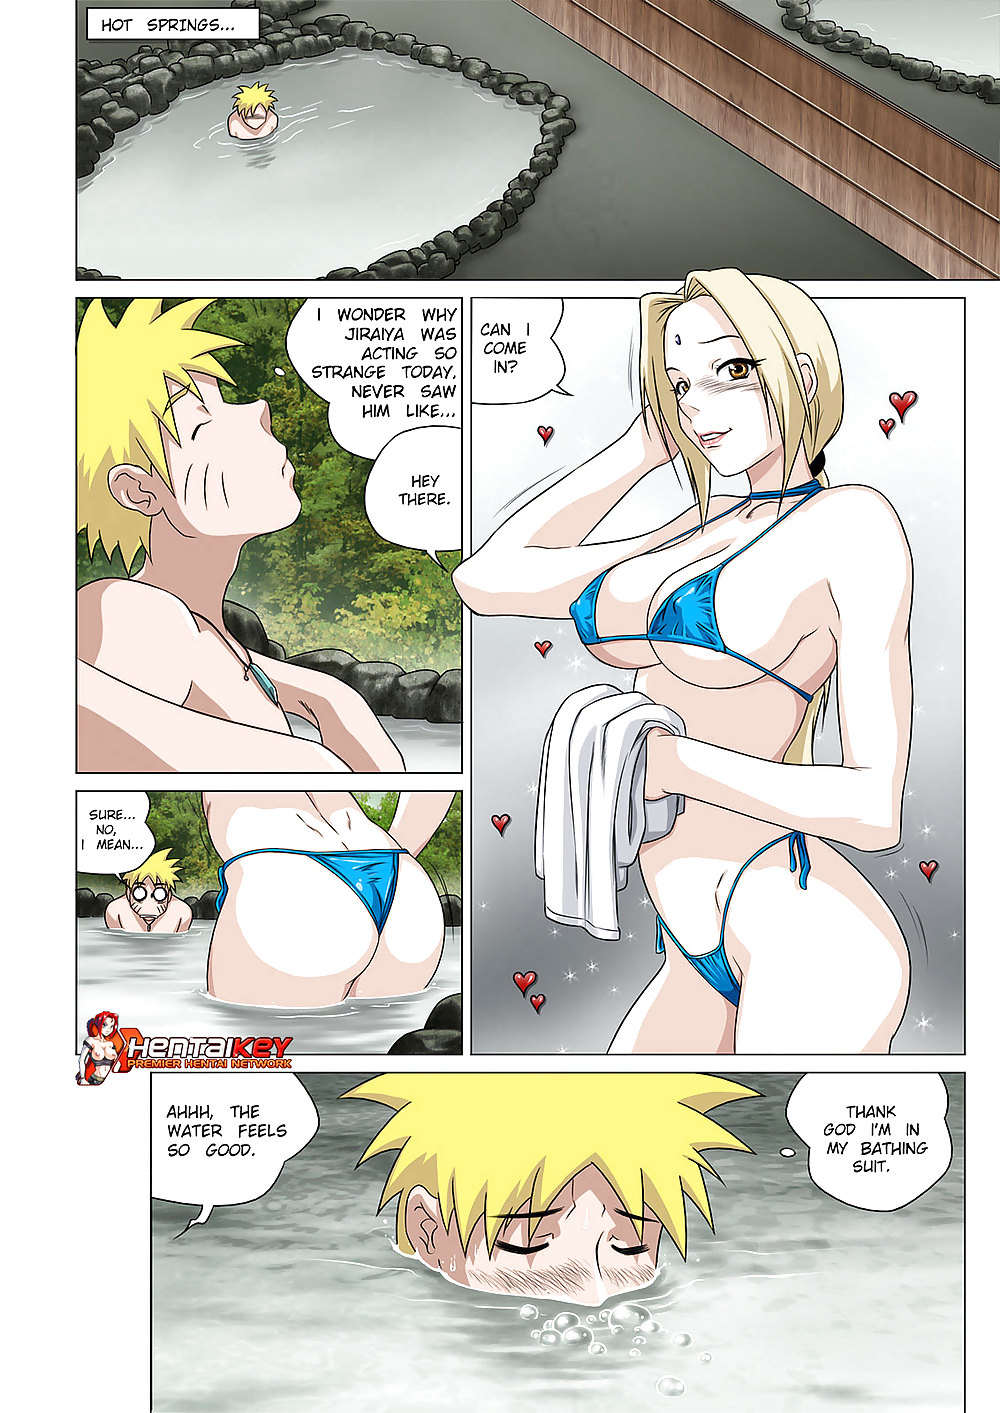 There's something about Tsunade #13746339